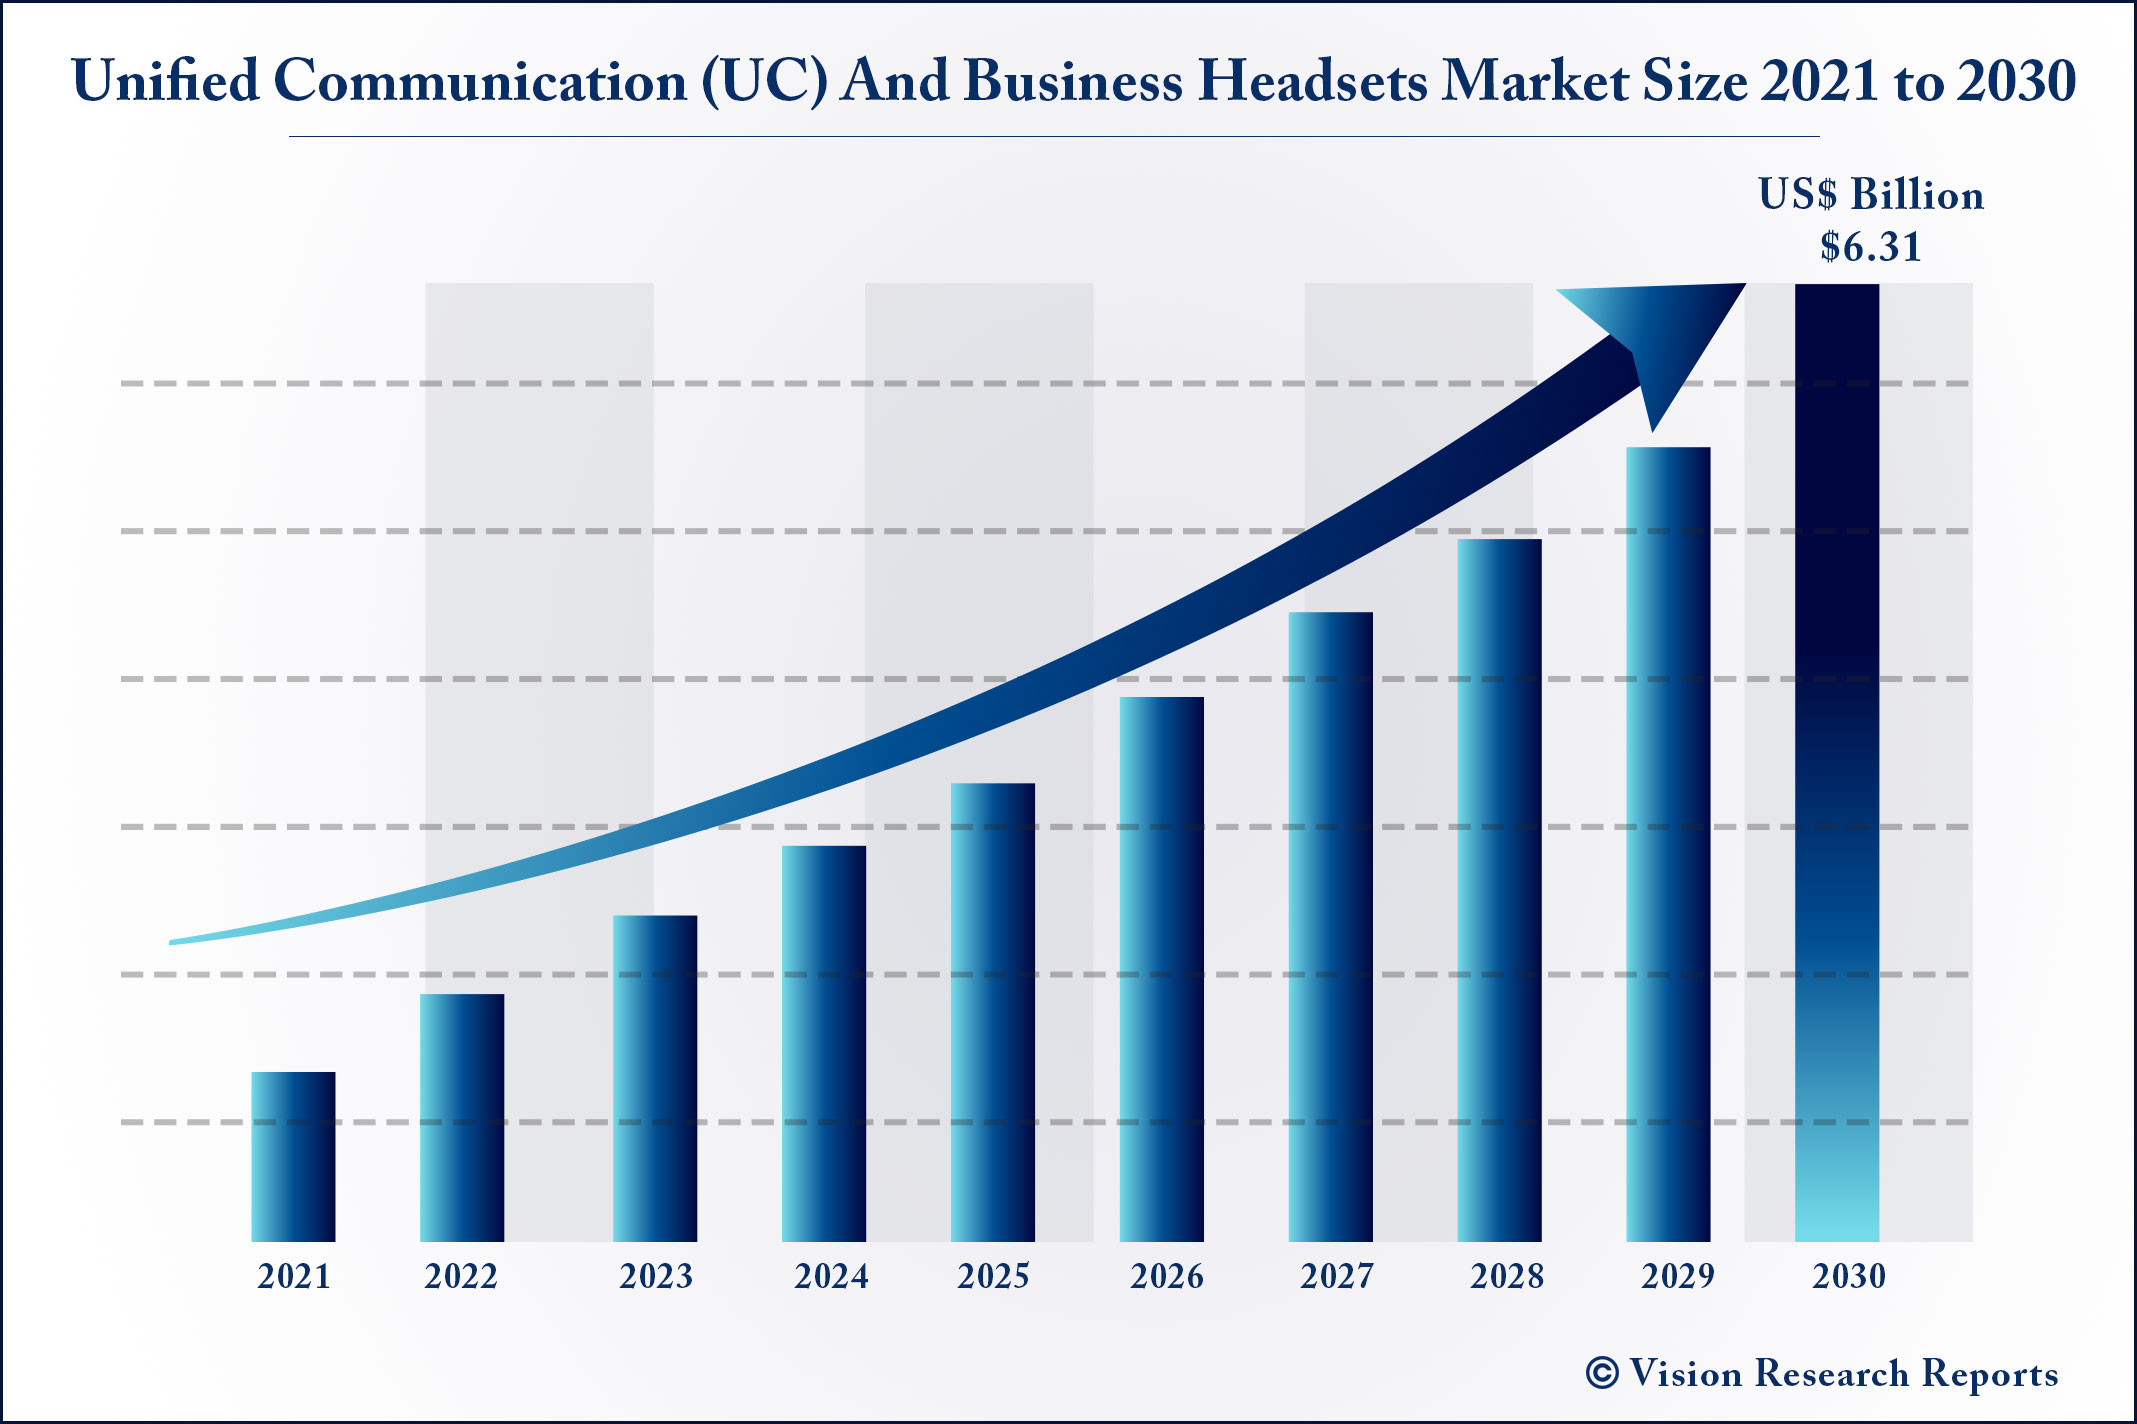 Unified Communication And Business Headsets Market Size 2021 to 2030